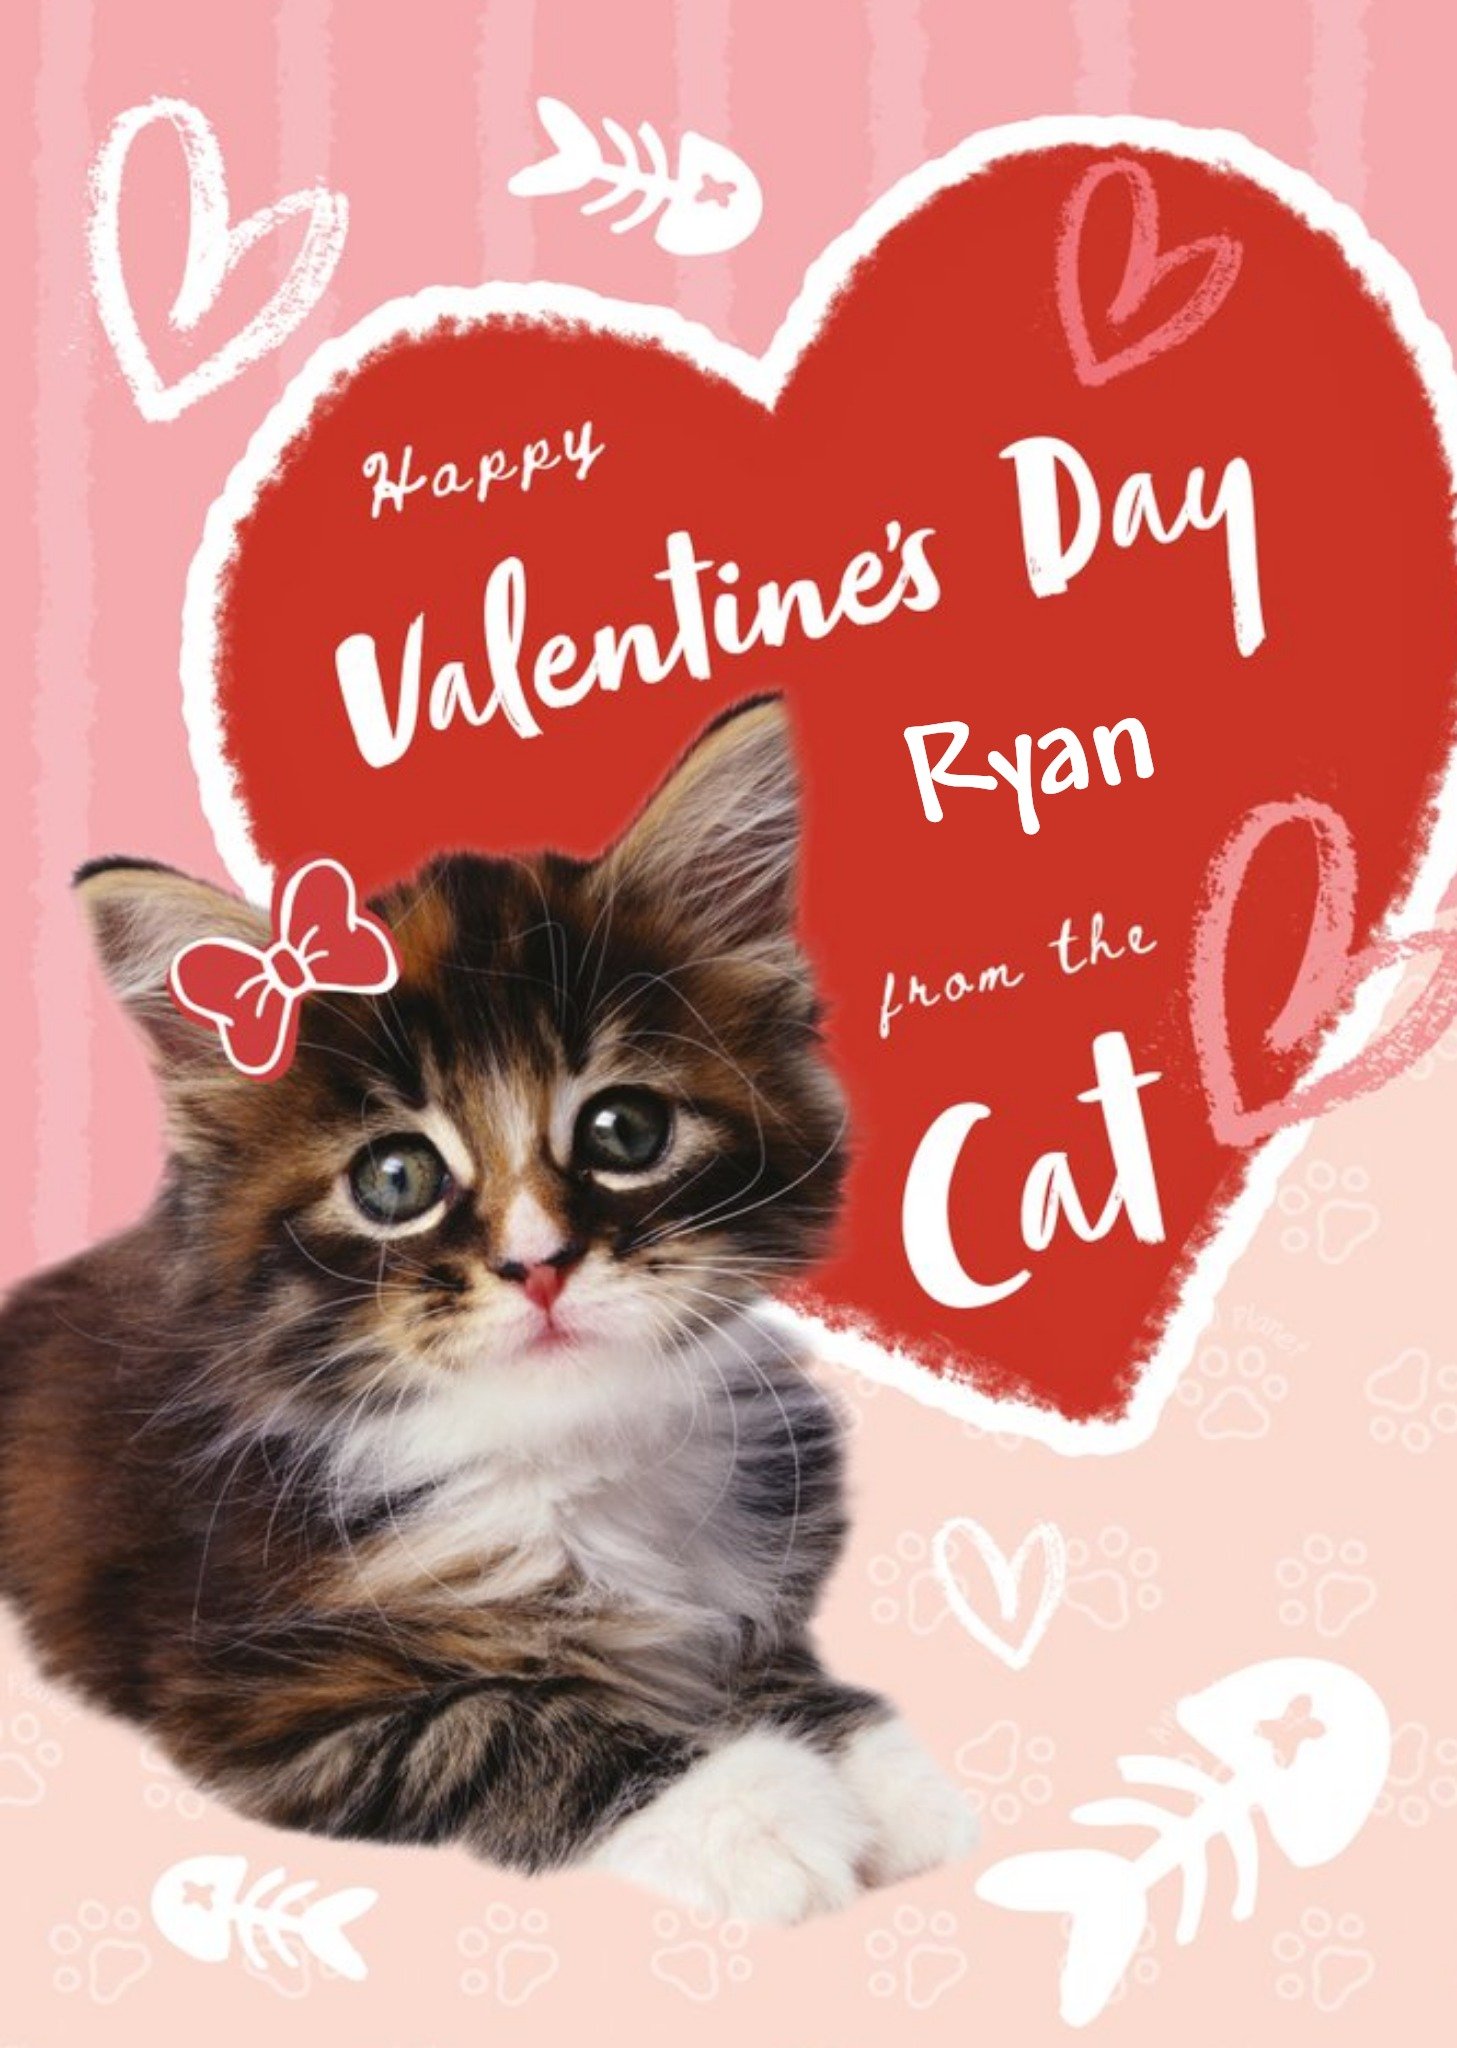 Moonpig Animal Planet From The Cat Valentine's Day Card Ecard